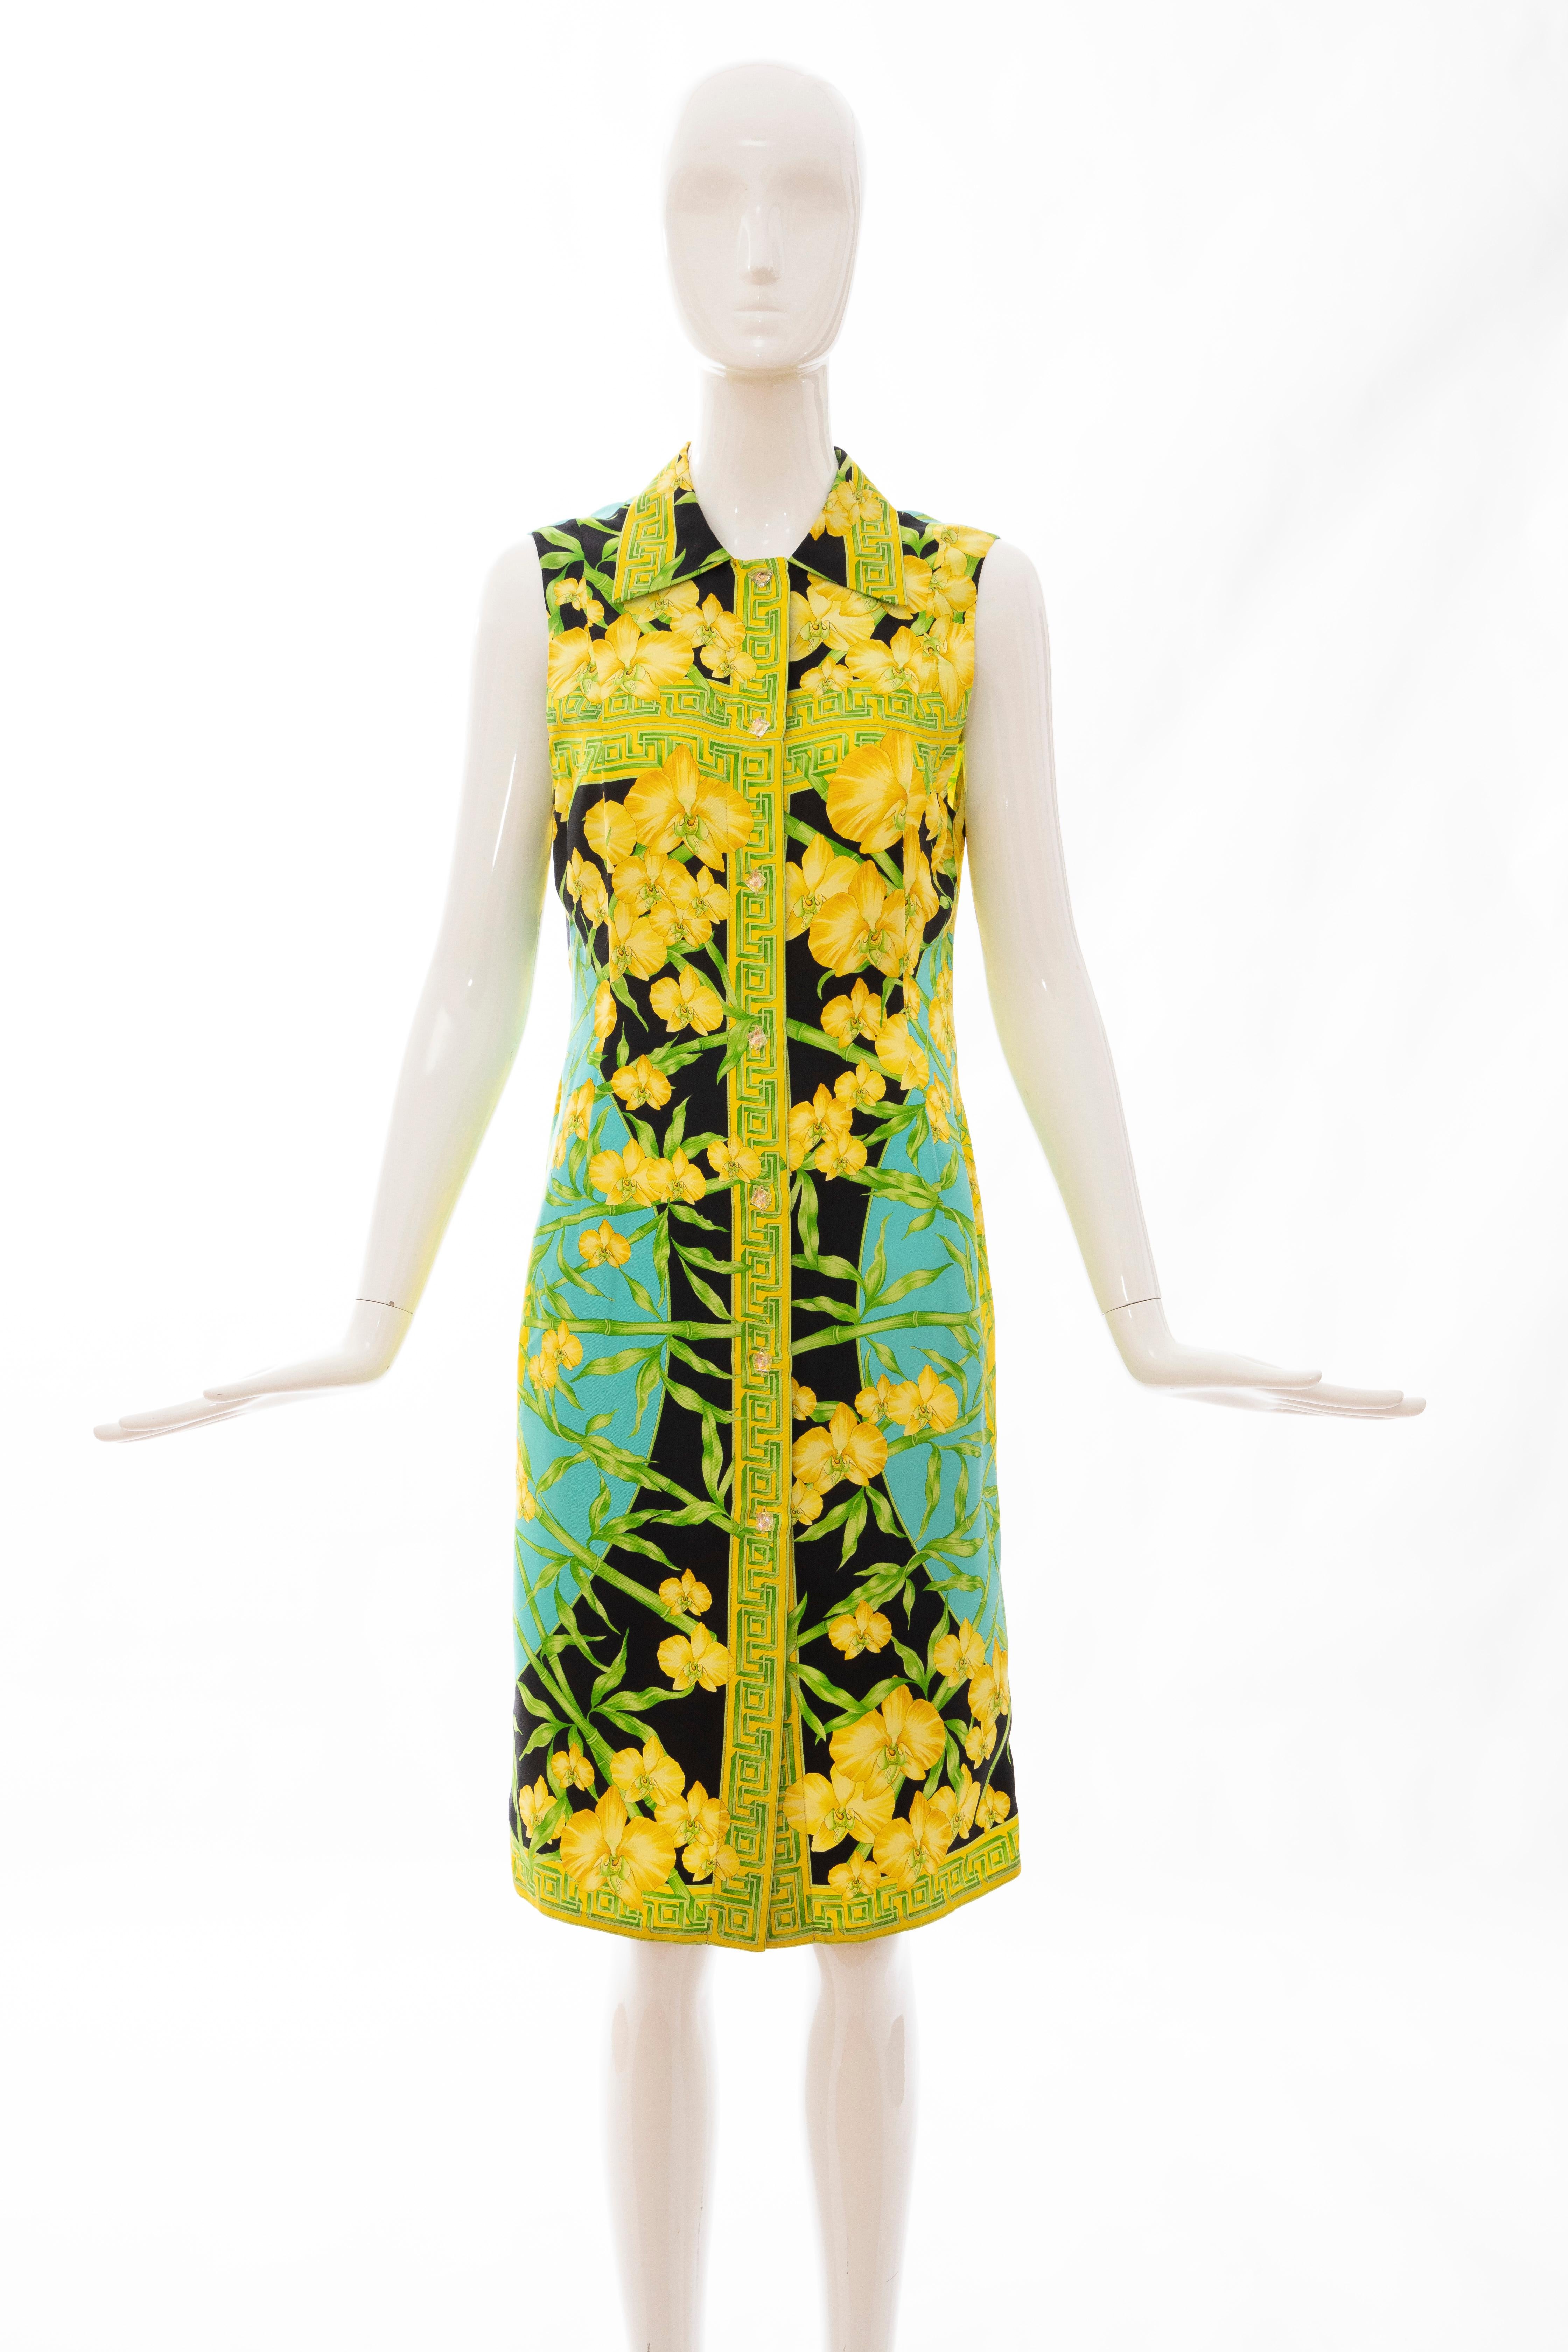 Gianni Versace Couture, Circa: 1990's, silk printed yellow orchids, aurora borealis button front sleeveless sheath dress with pointed collar.

IT. 44, US. 8

Bust: 34, Waist, 31, Hips: 40, Shoulder: 14, Length: 41